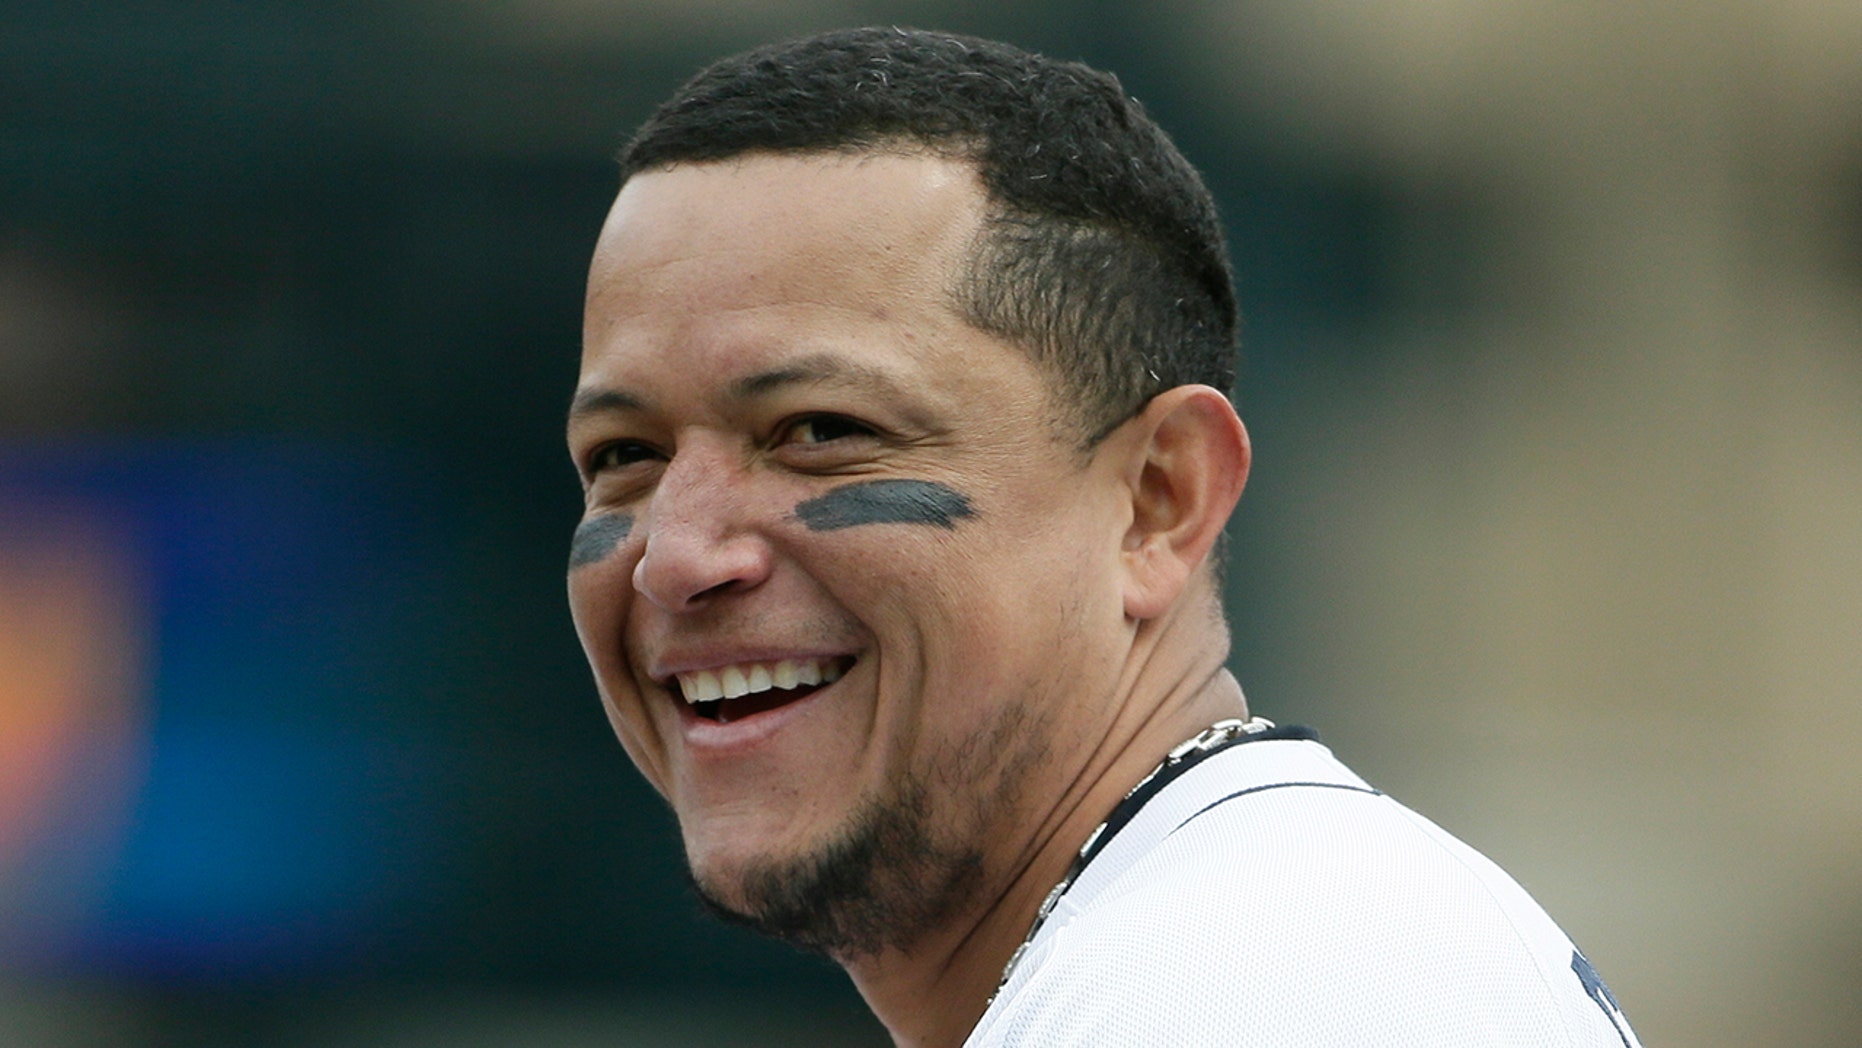 Detroit Tigers' Miguel Cabrera forced to pay $20Gamonth in child